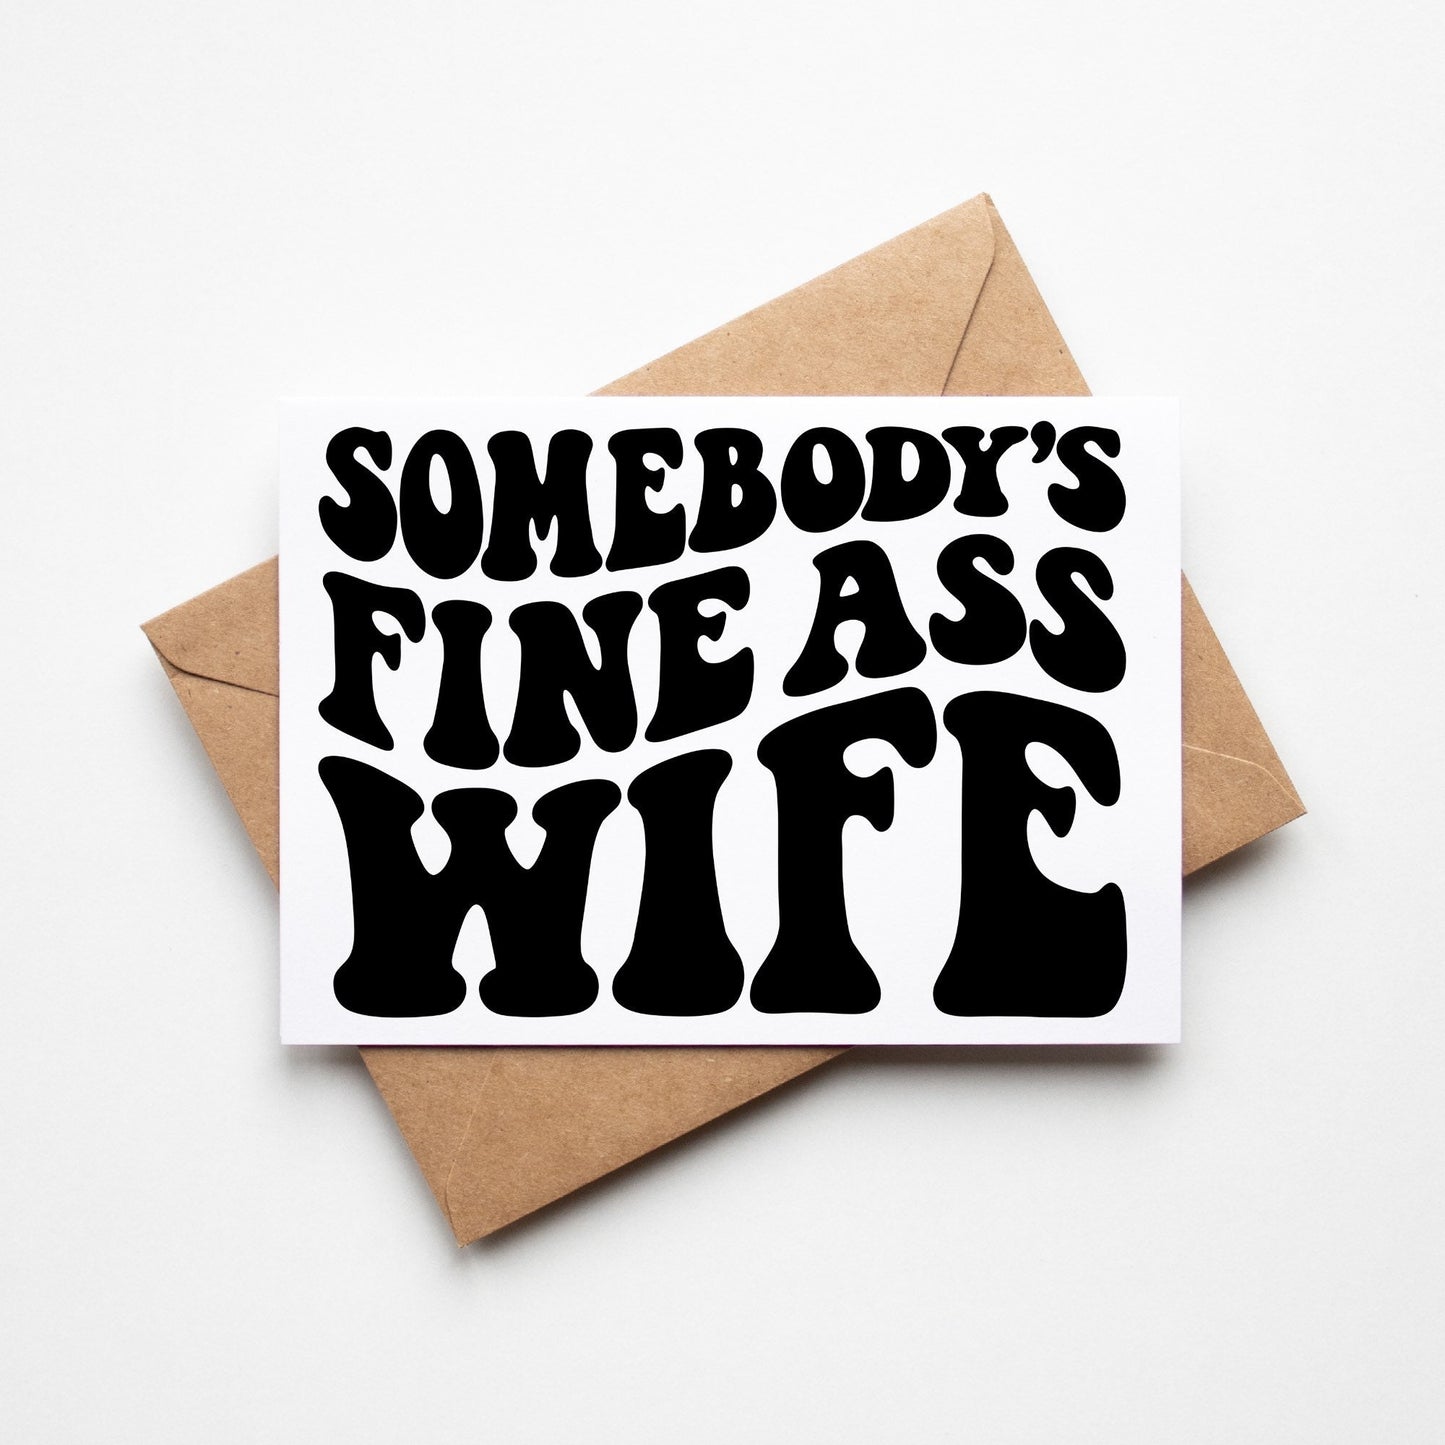 SUBLIMATION ready to press - Someone’s fine ass wife print transfer design